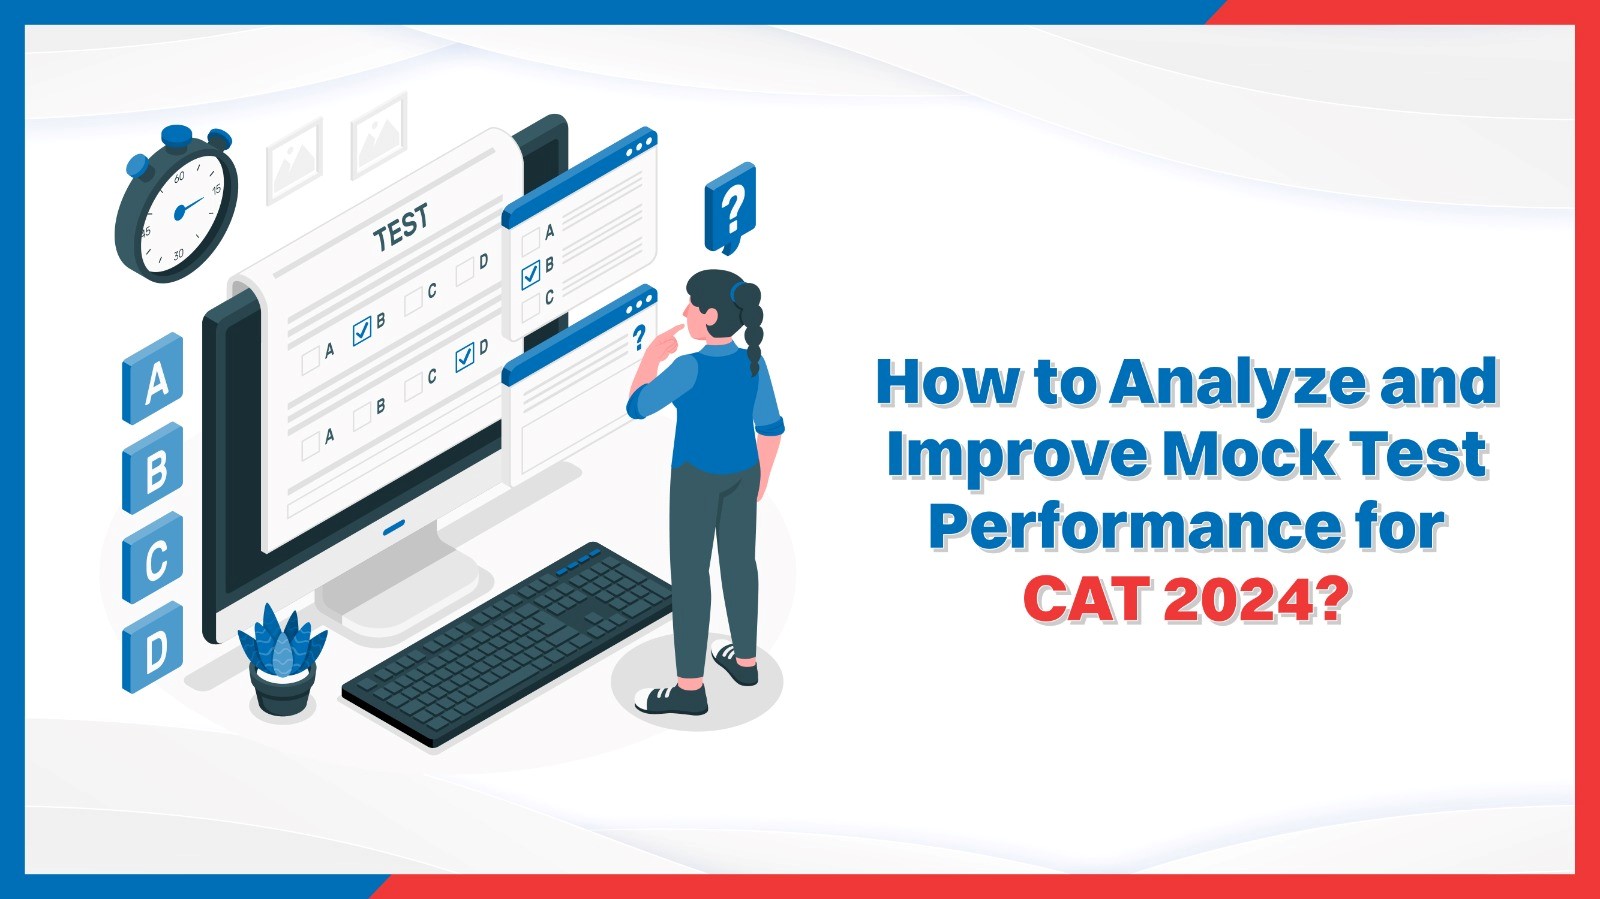 How to Analyze and Improve Mock Test Performance for CAT 2024?